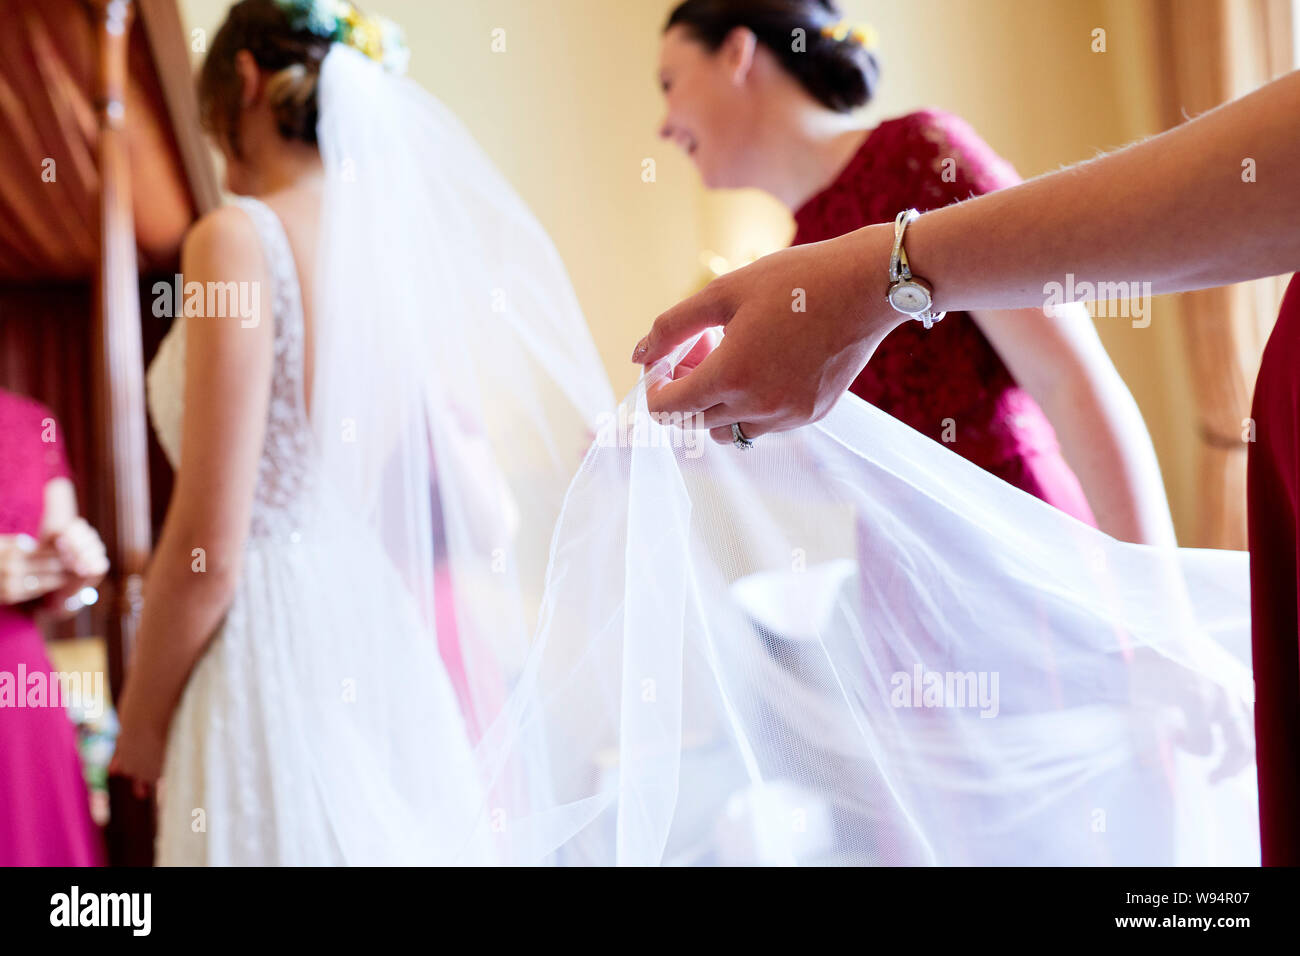 Bride before wedding hires stock photography and images Alamy